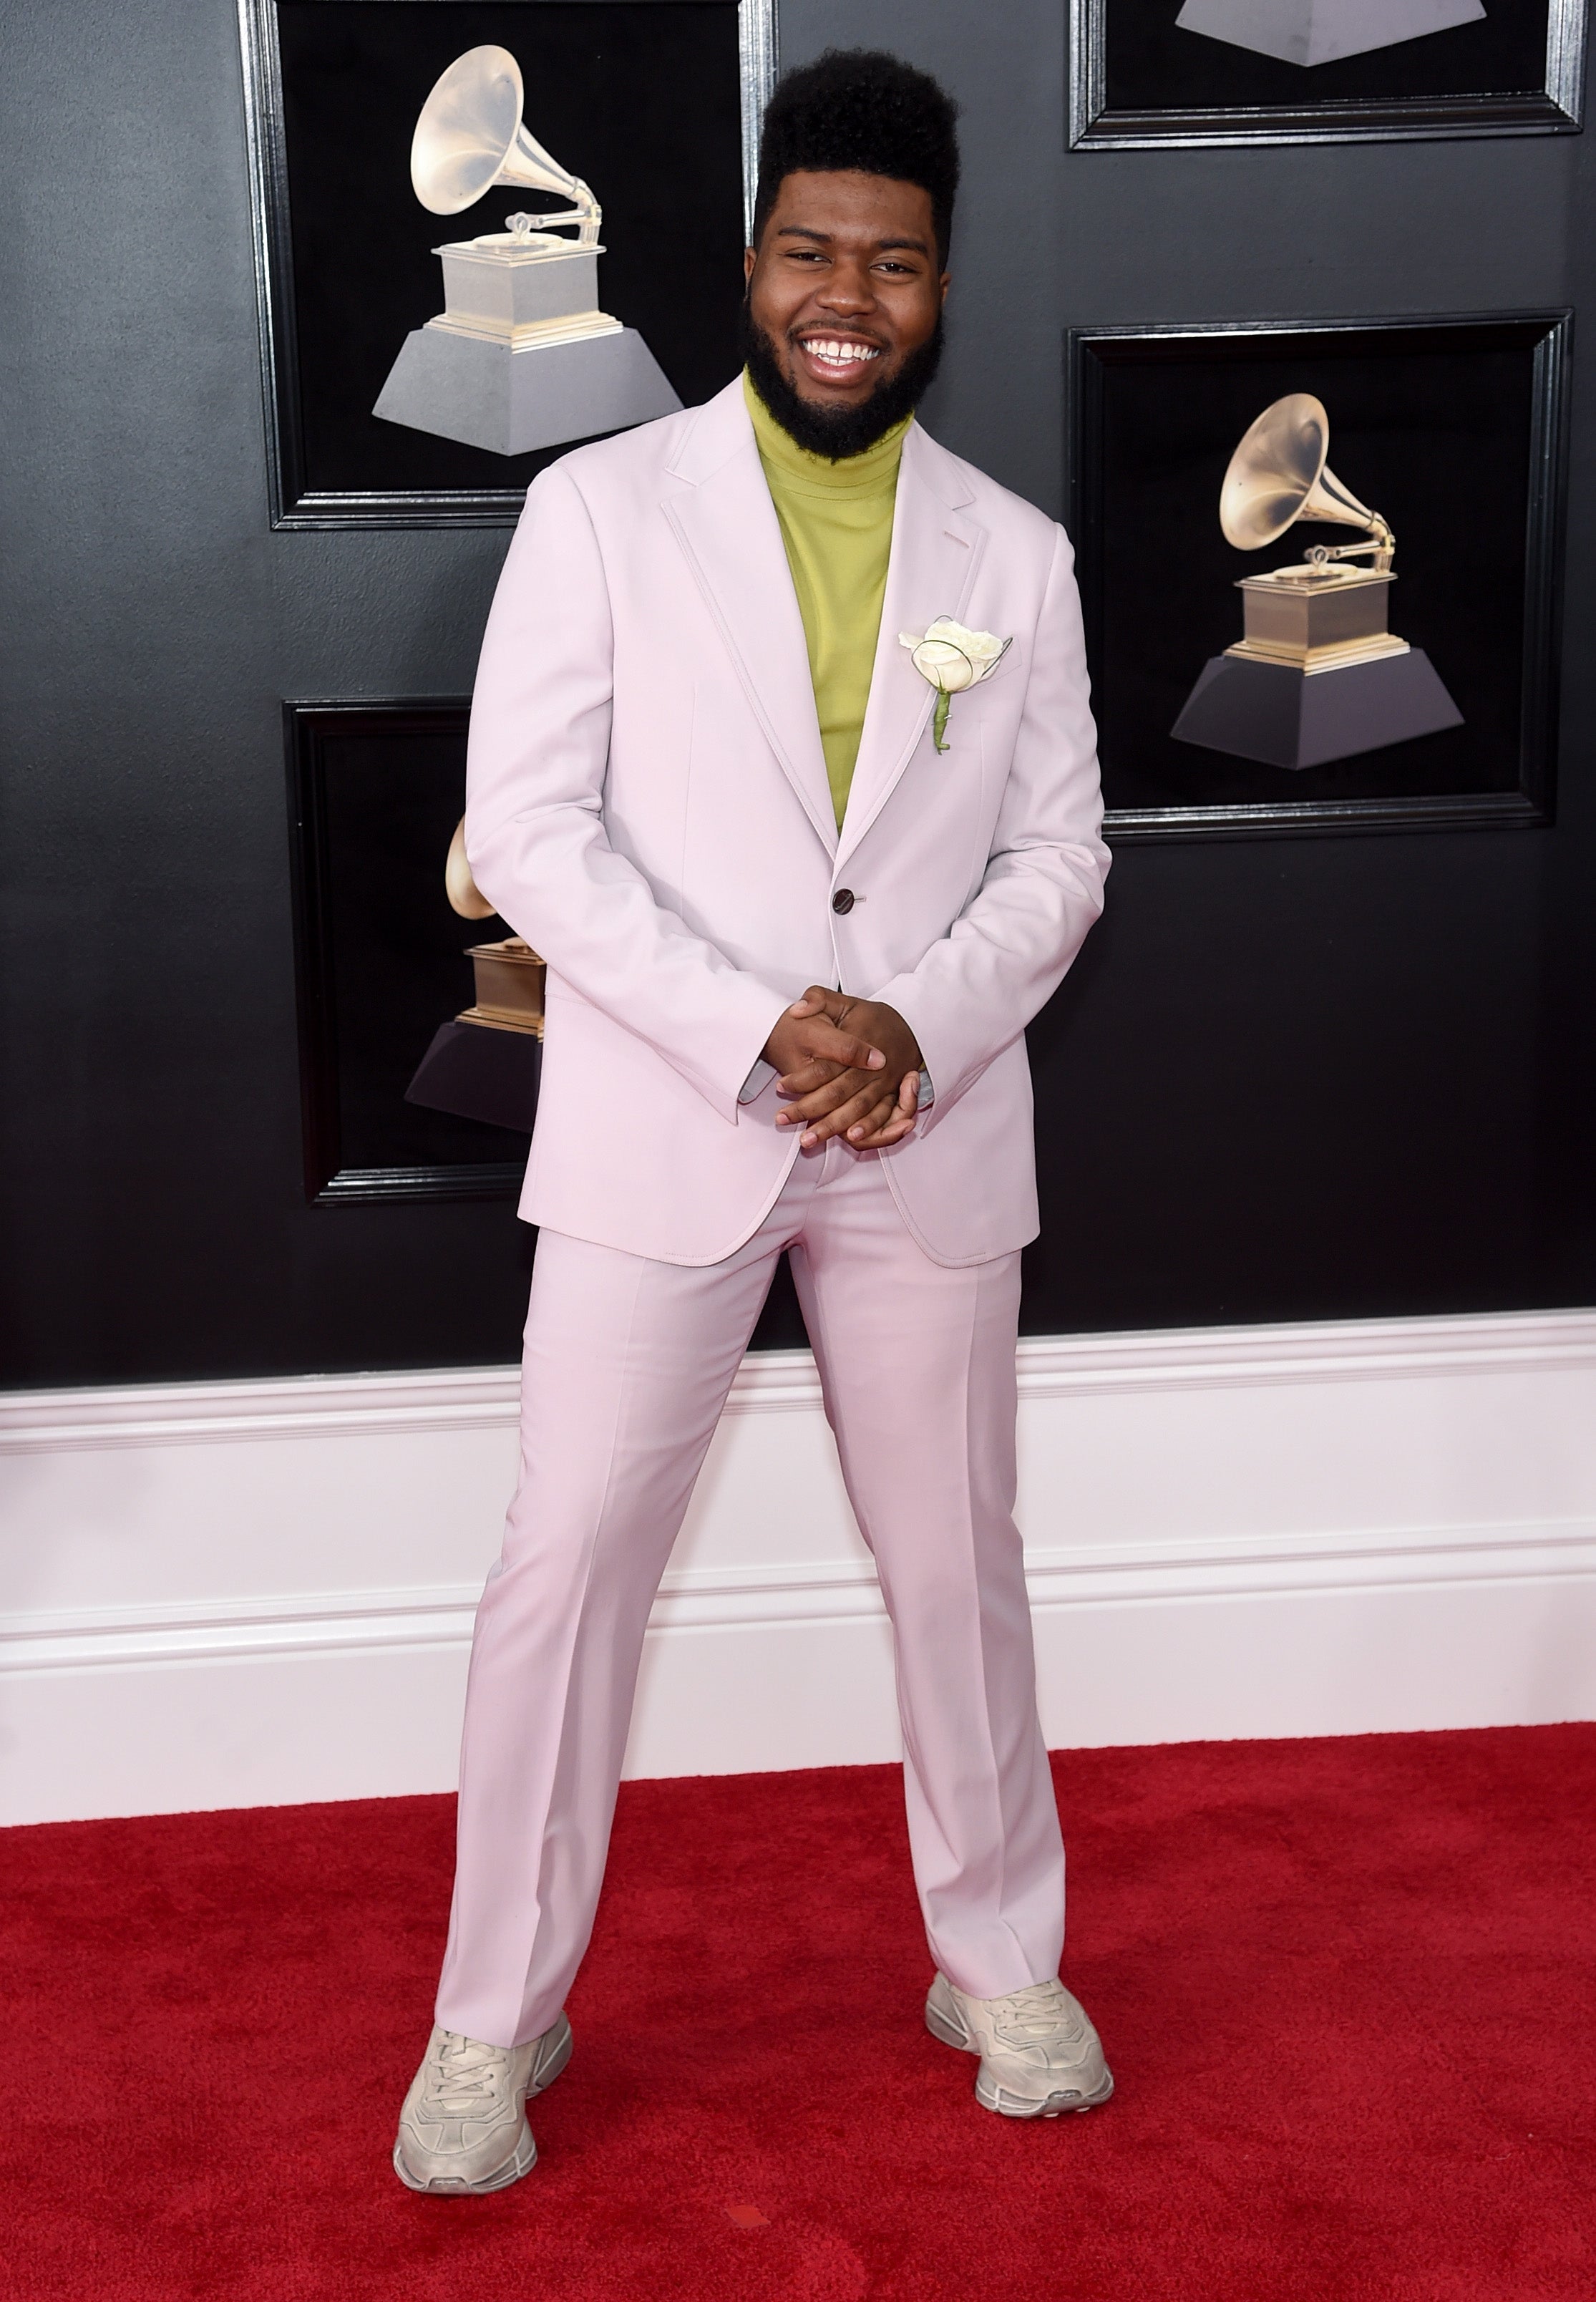 The Best Red Carpet Looks From the 2018 Grammys